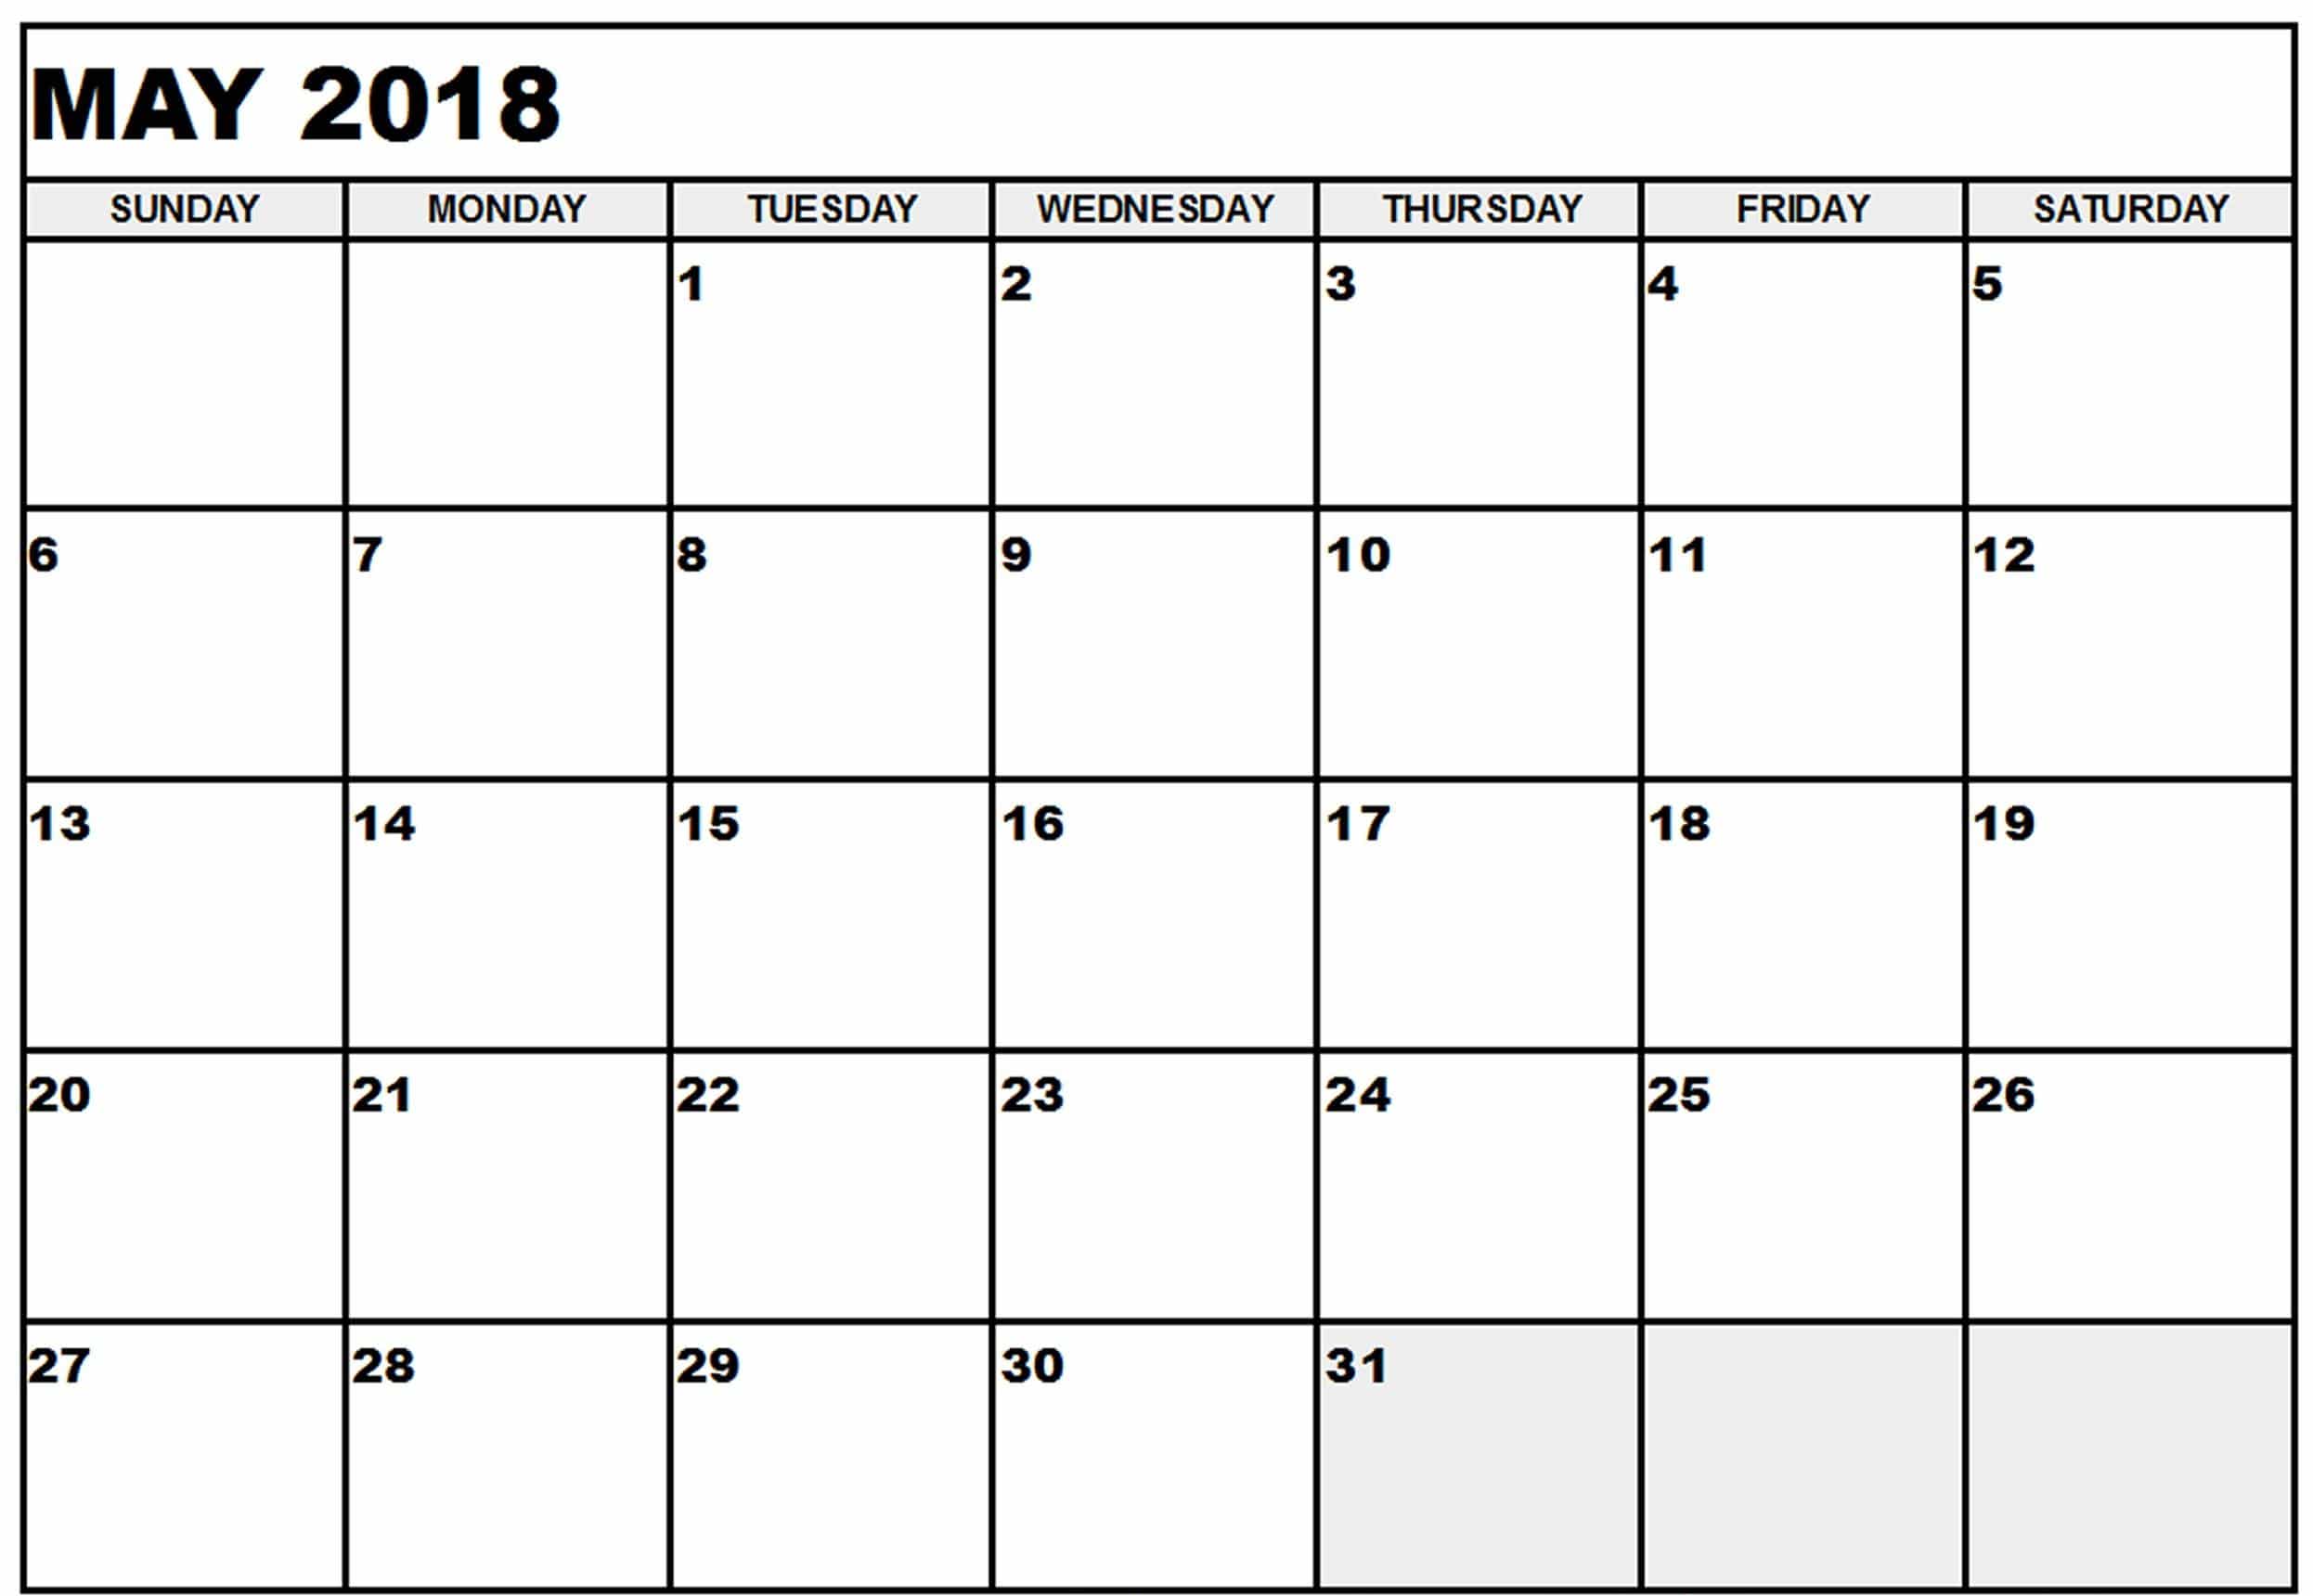 May 2018 Calendar With Holidays